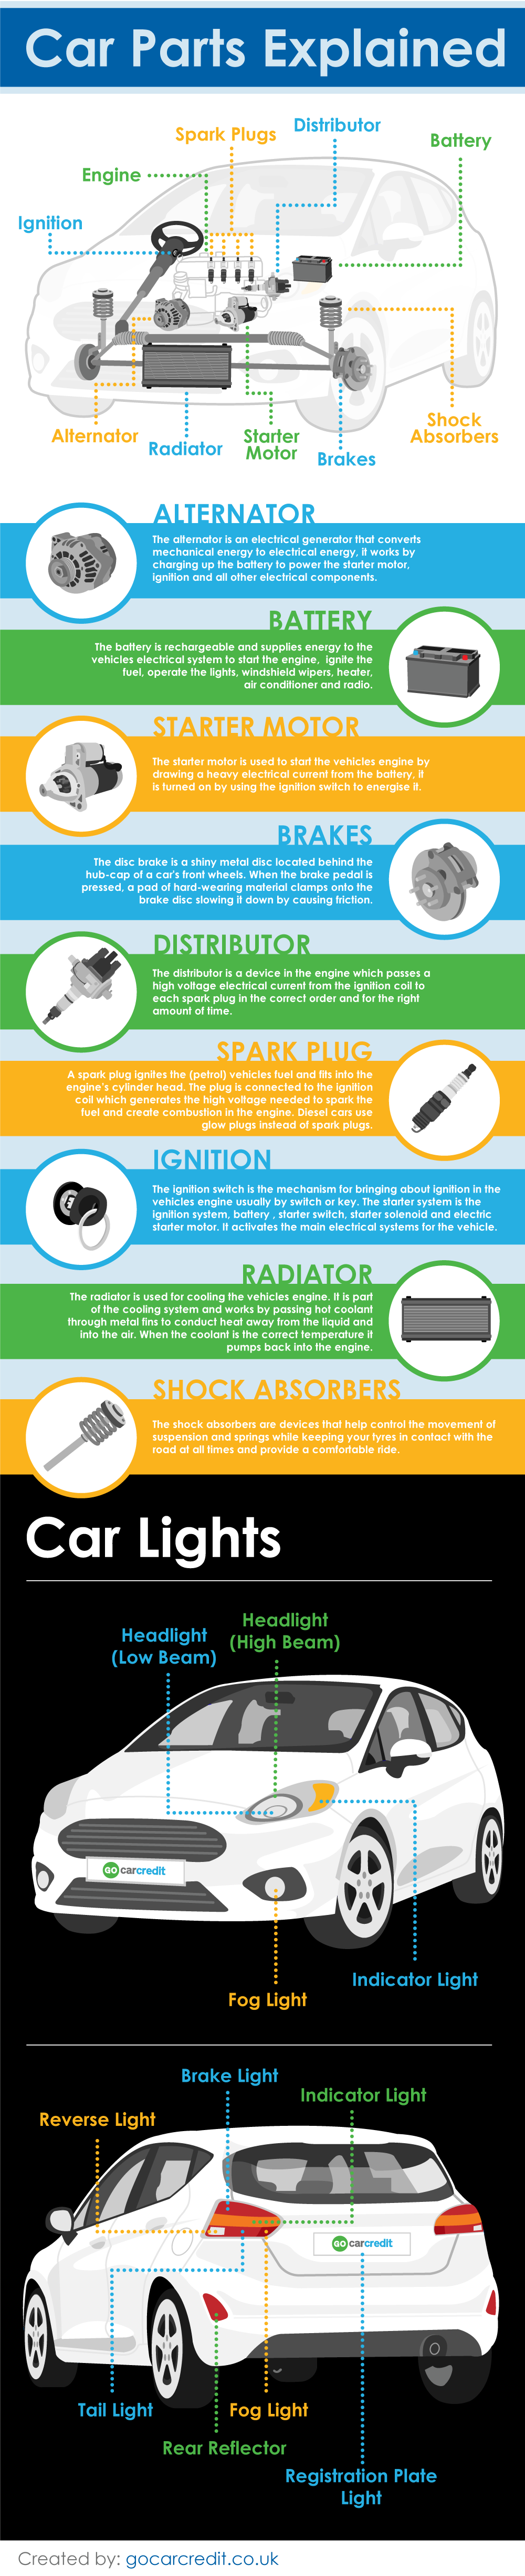 Car Parts Explained | Infographic Post